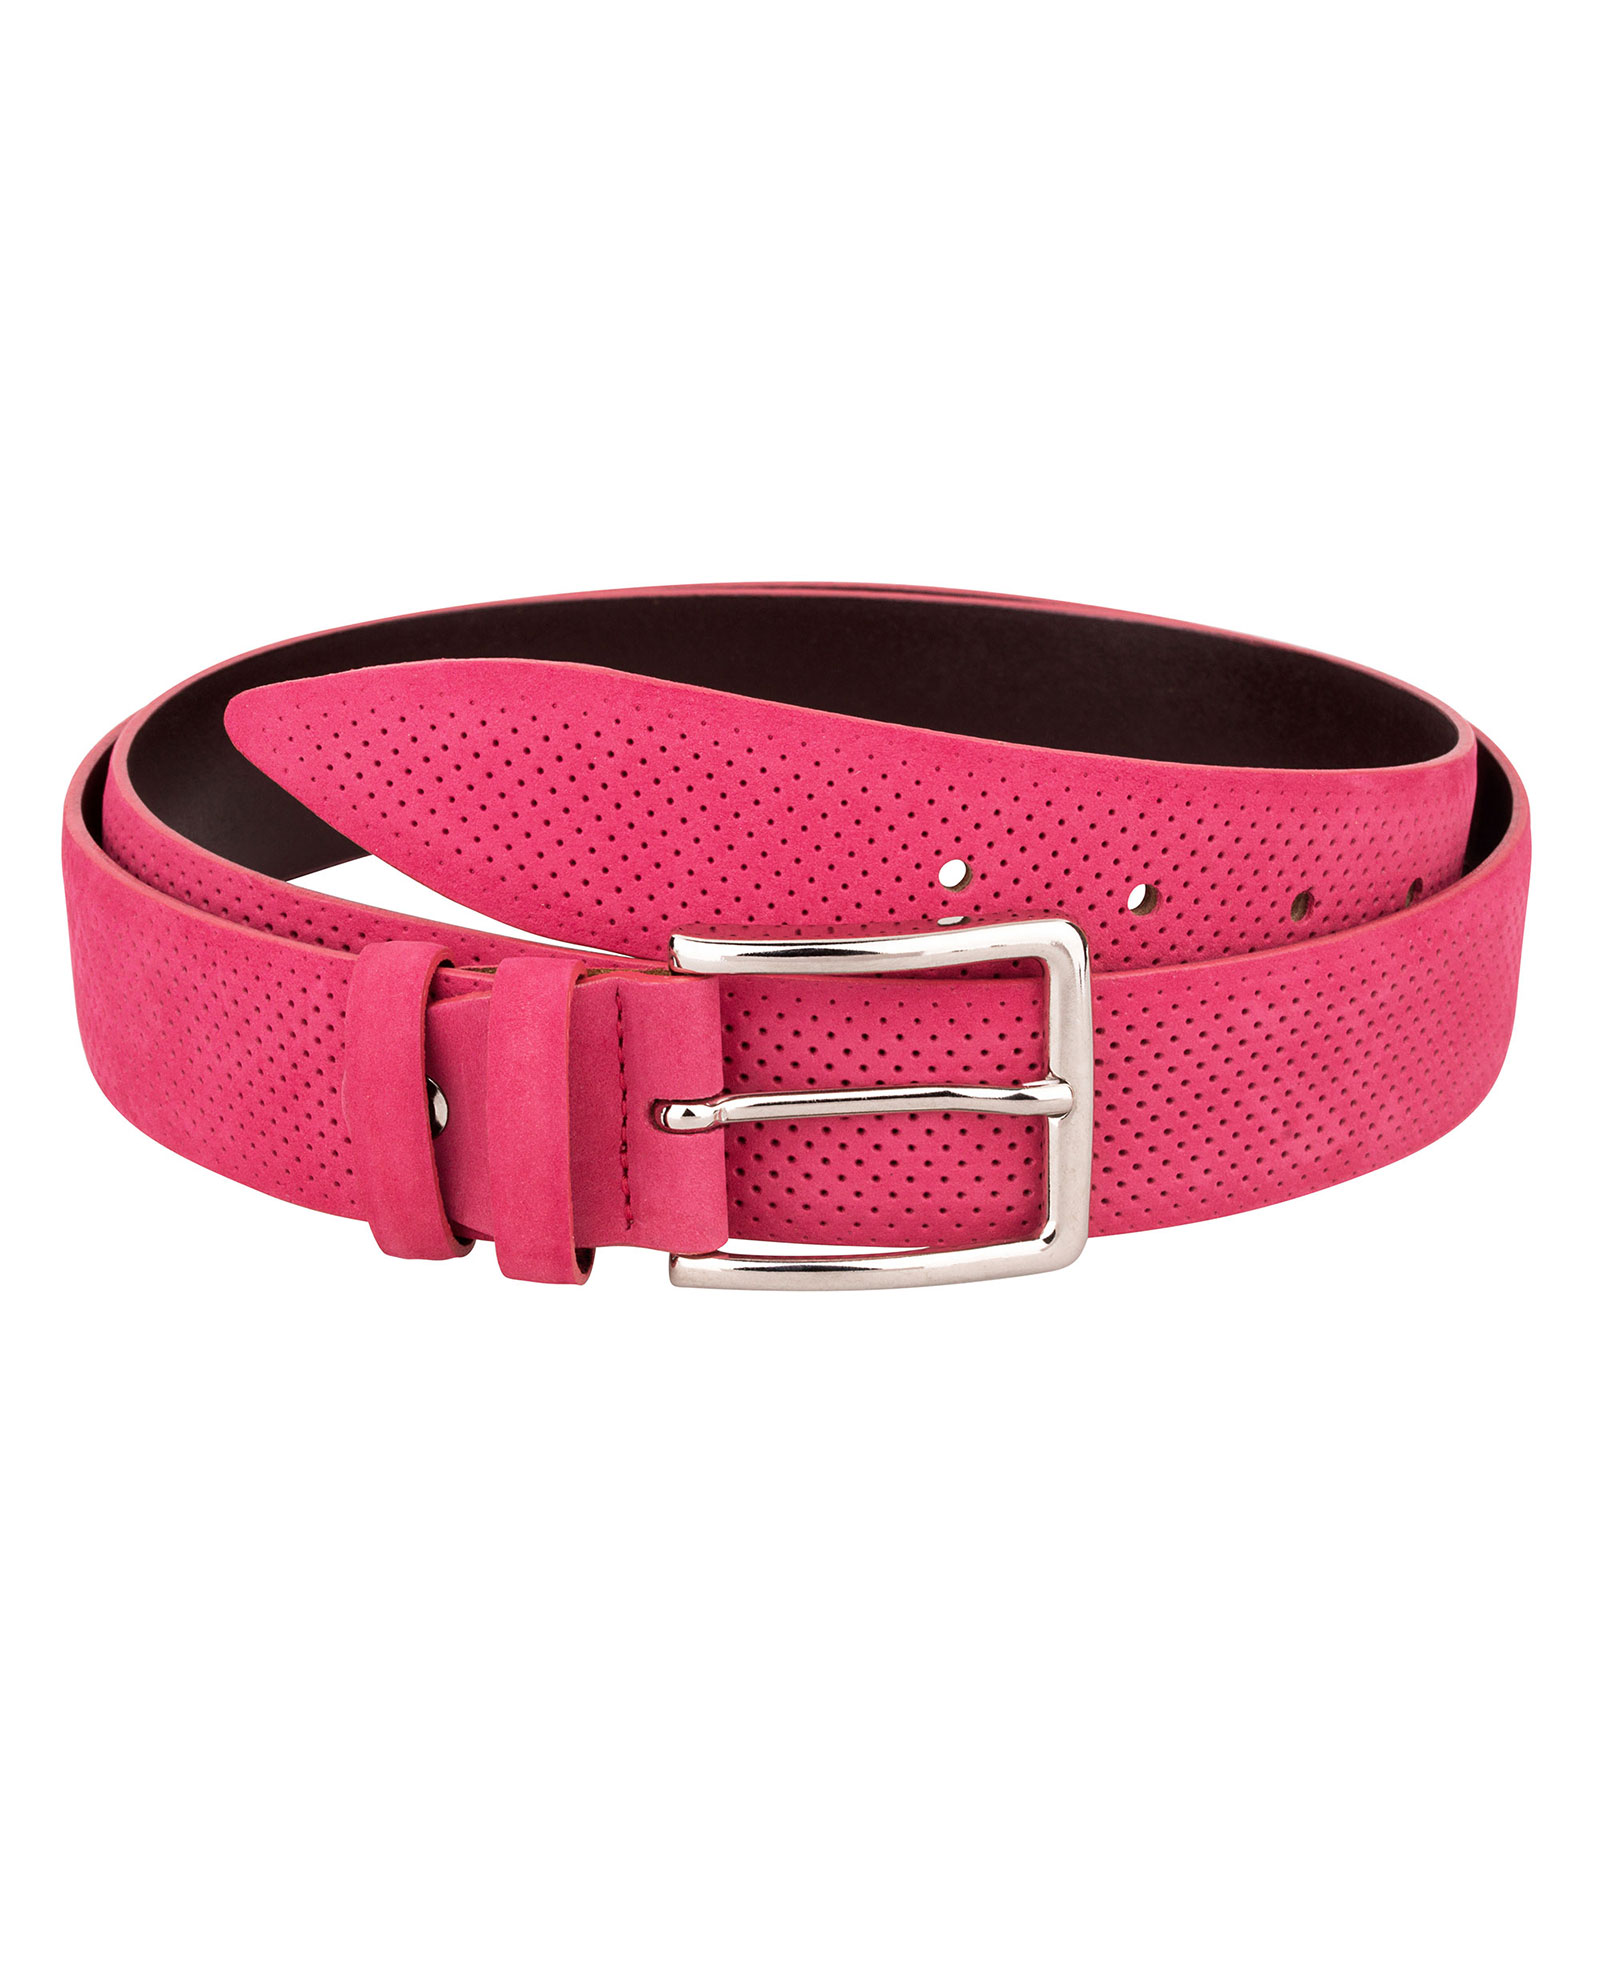 Buy Women's Pink Leather Belt - Perforated Nubuck - Free Shipping